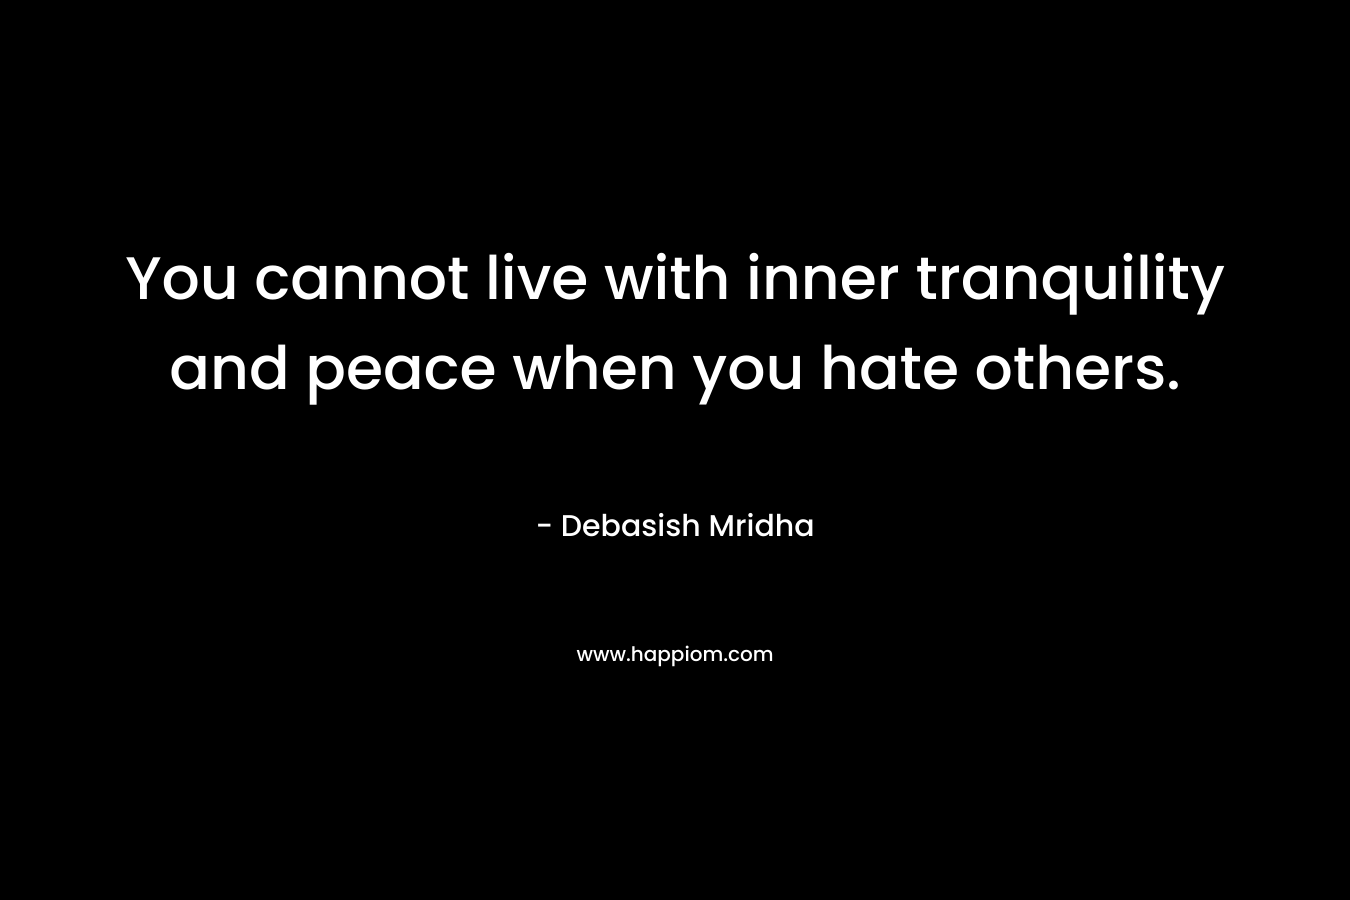 You cannot live with inner tranquility and peace when you hate others.